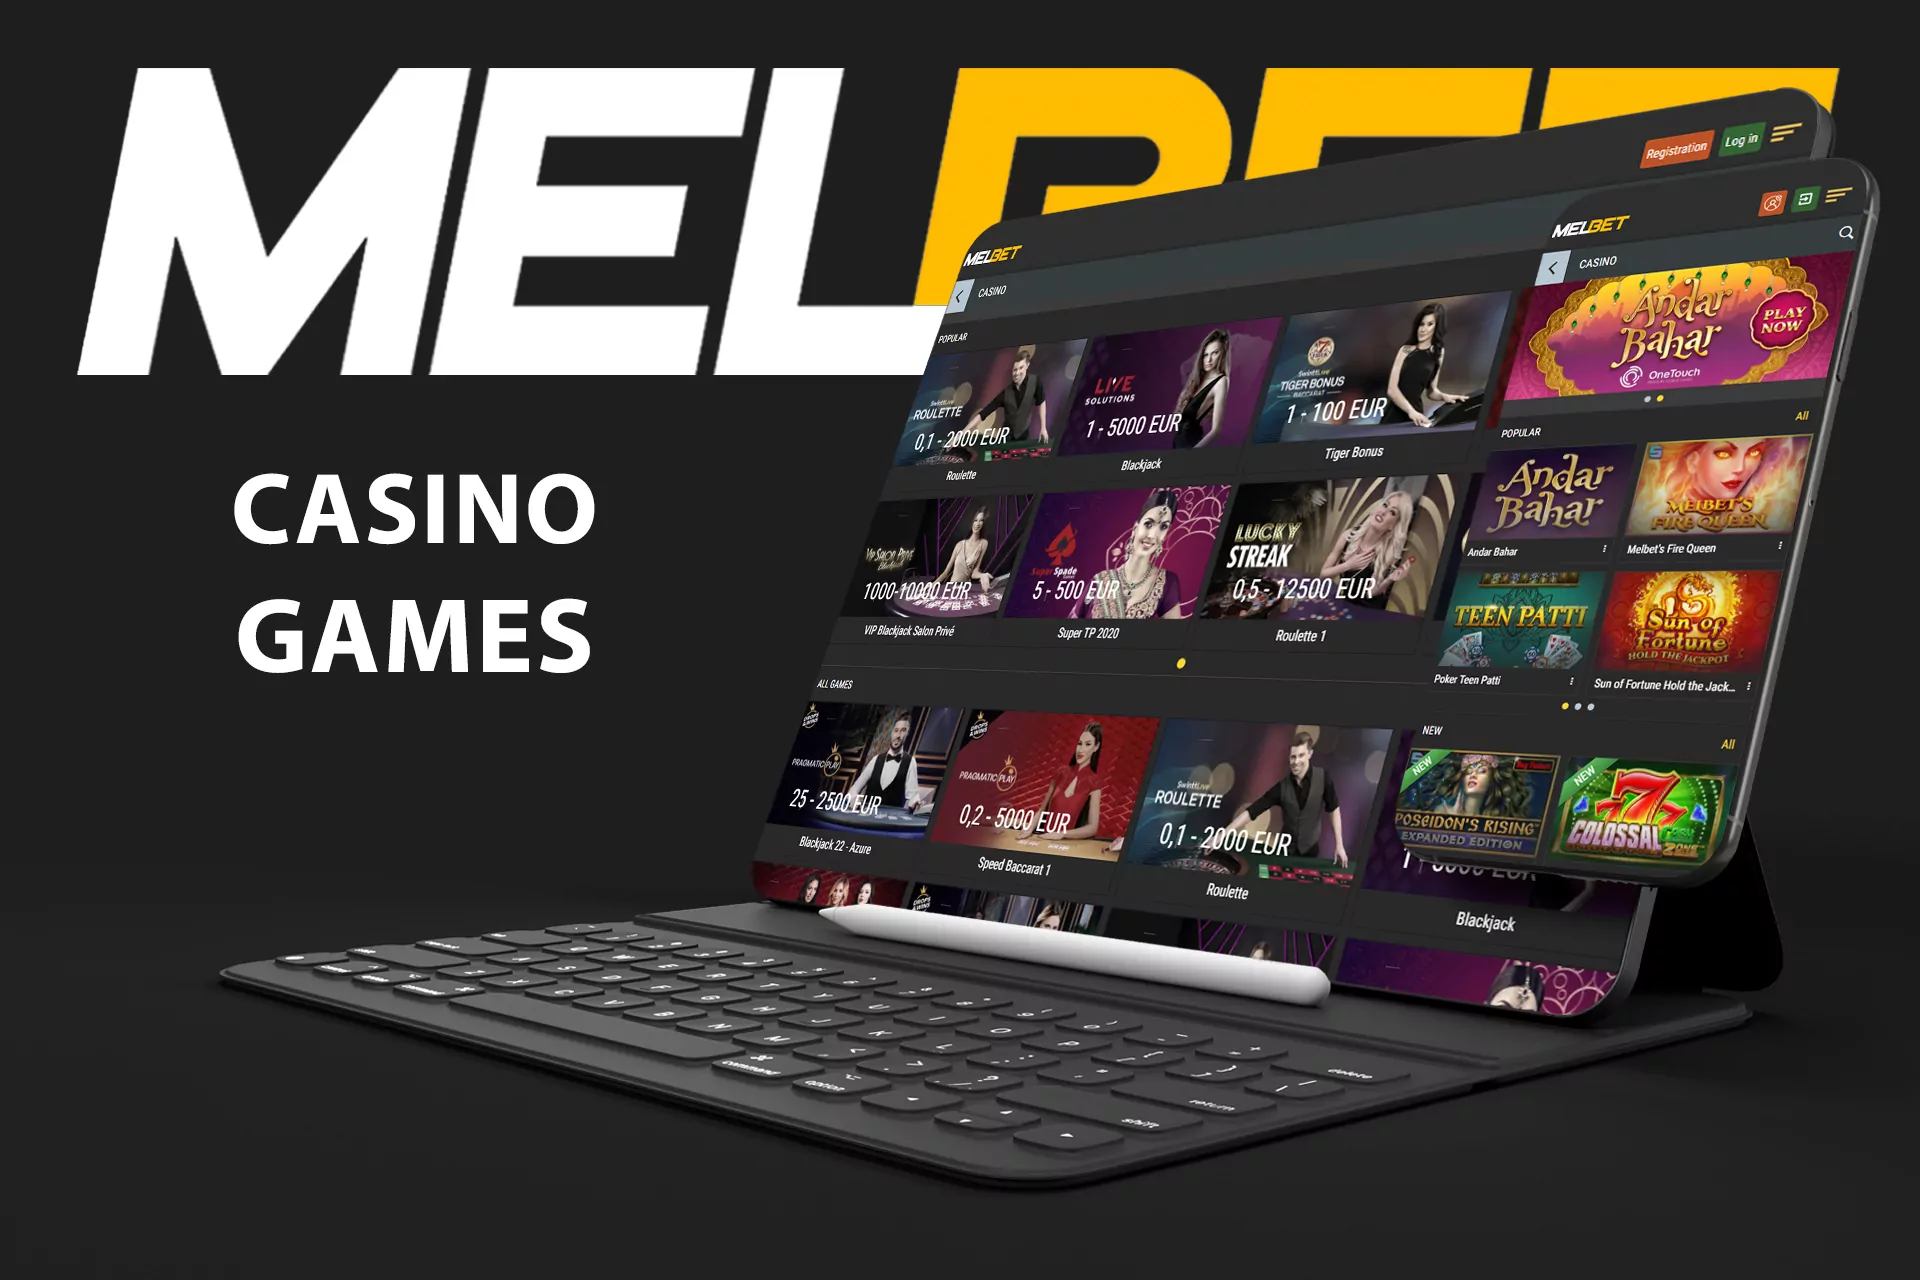 At the Melbet Casino, you find the games by the most popular providers.